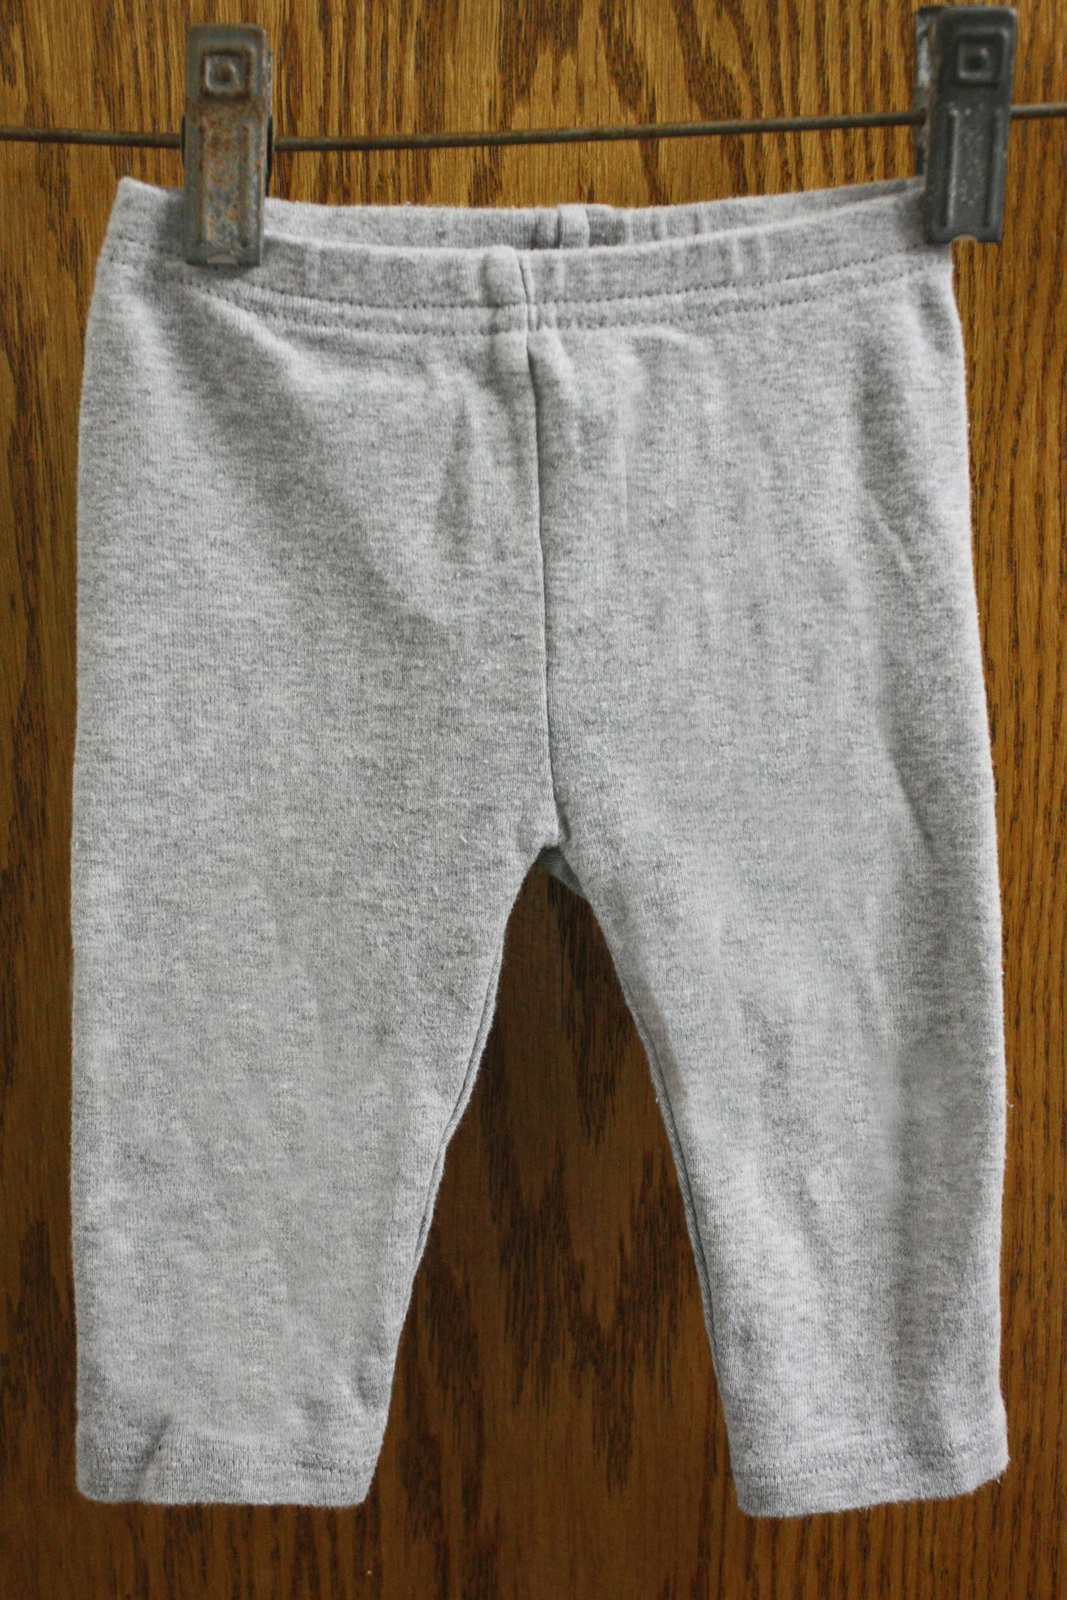 Child of Mine by Carter's Gray Pants - size girls 3-6 Months (12.5-16.5lb) - $8.99